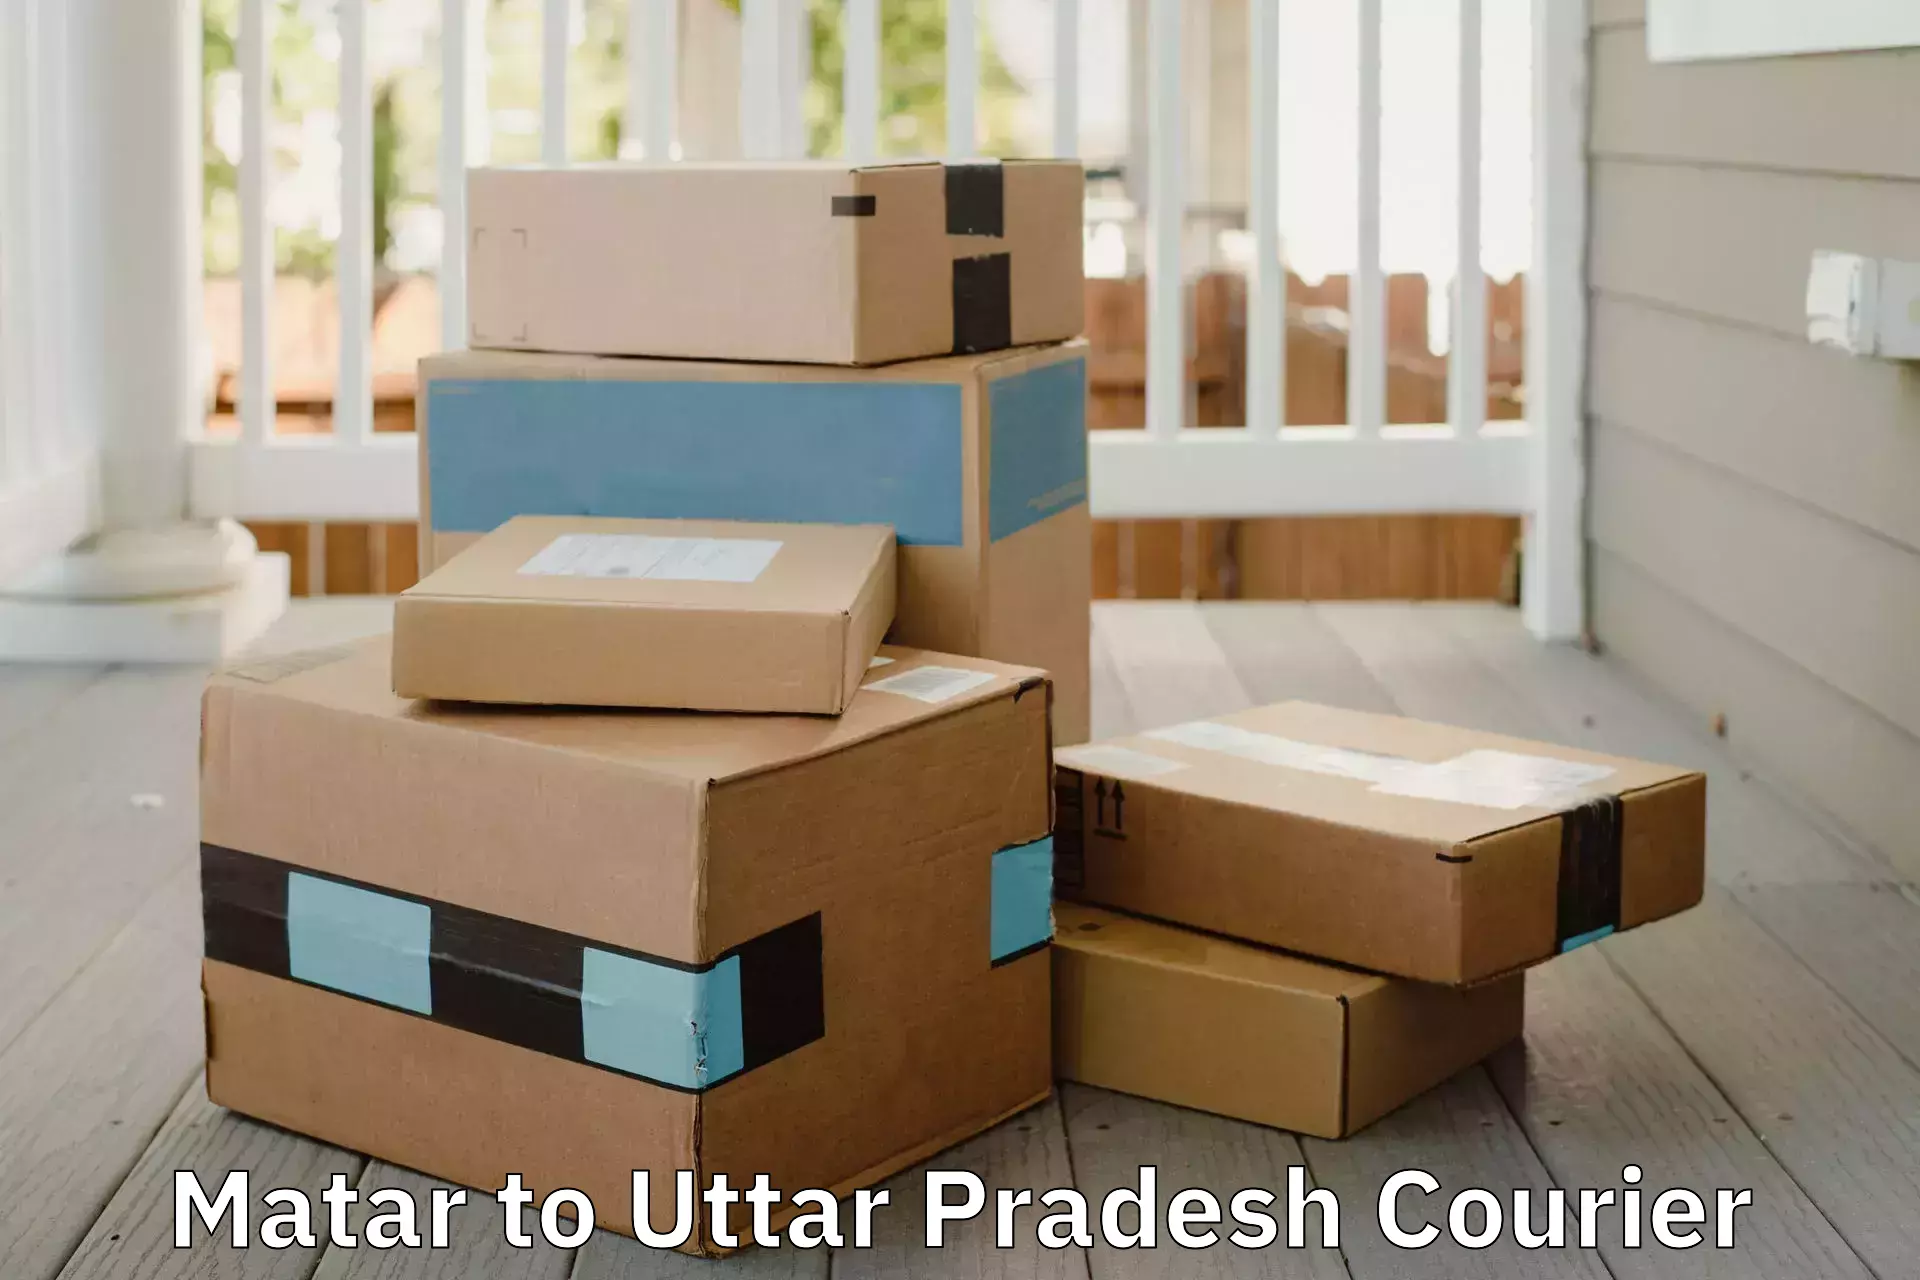 Full-service relocation Matar to Ayodhya